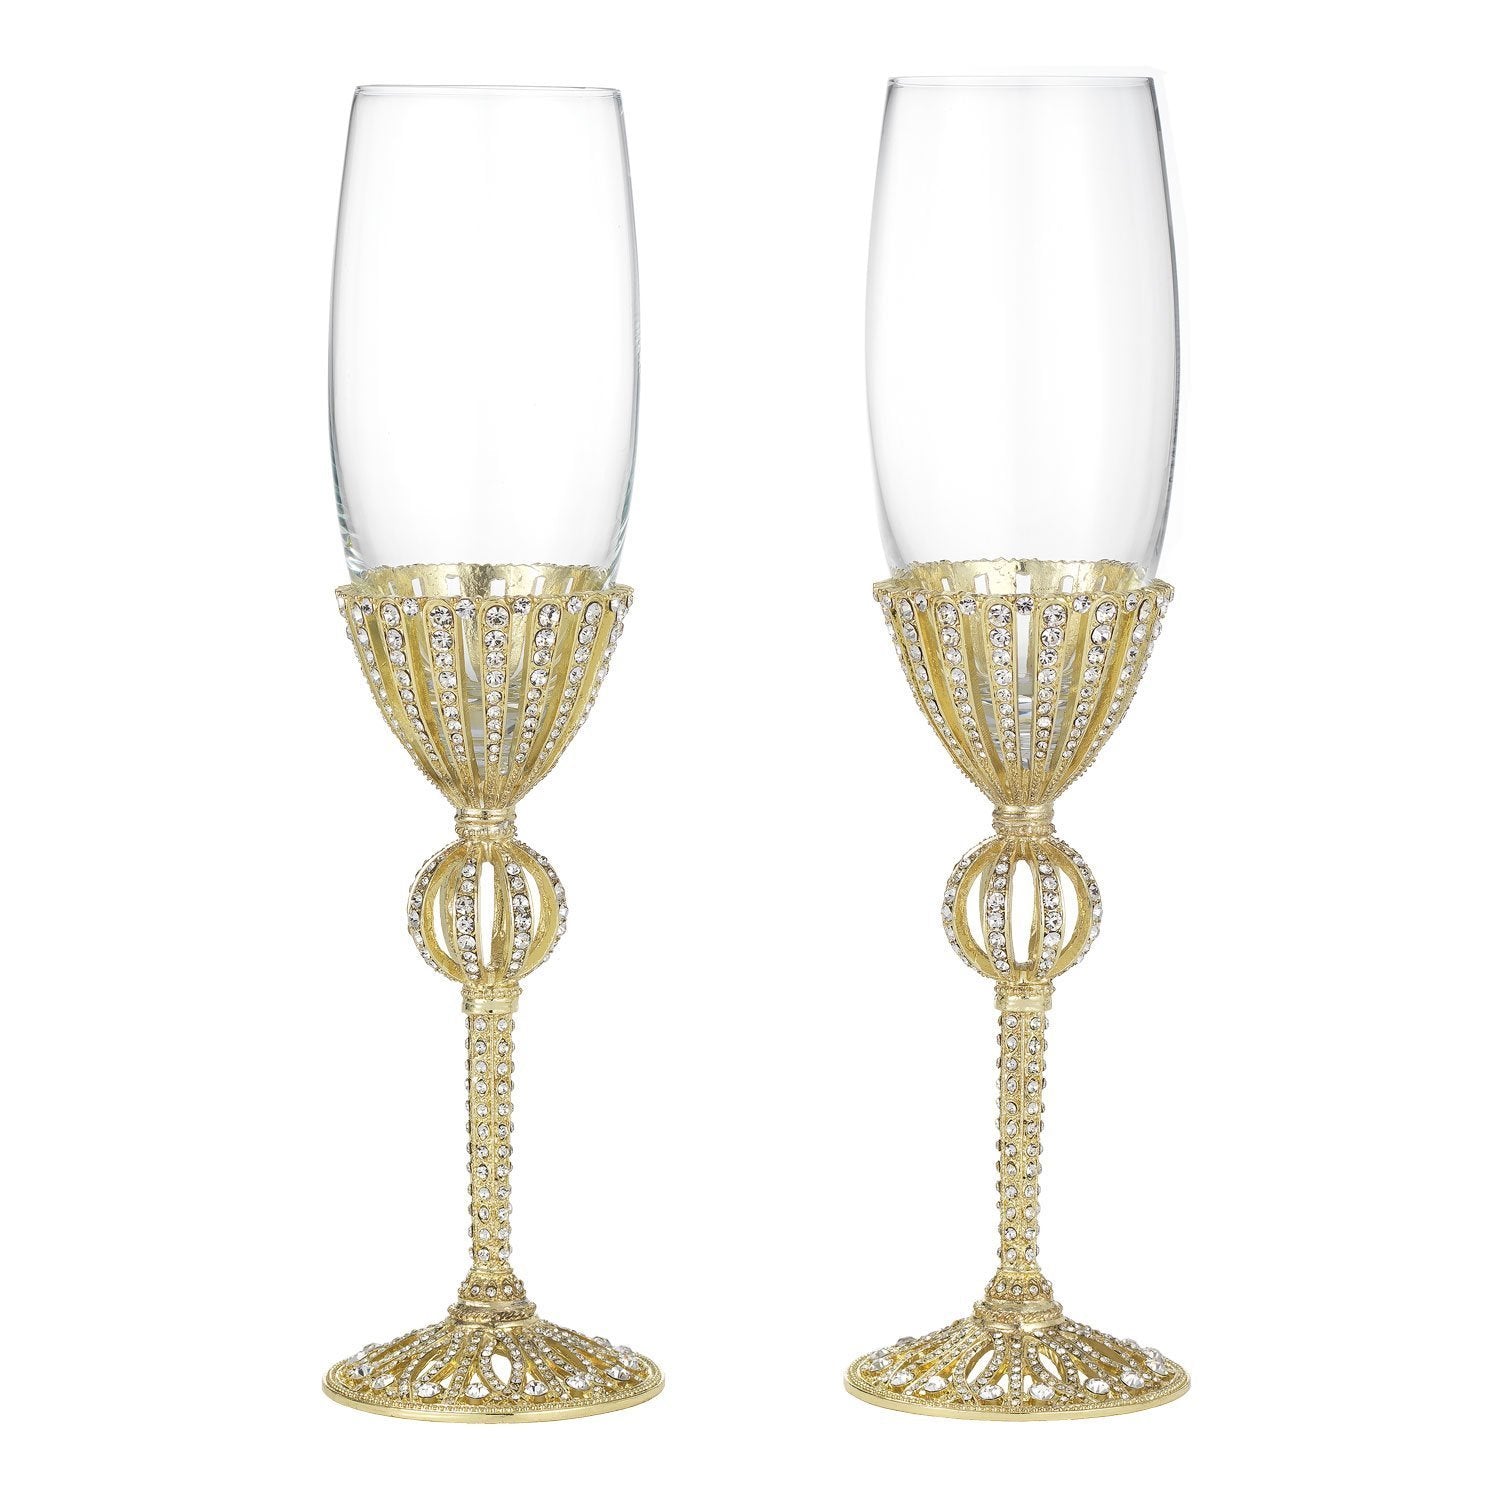 Gold Emerson Flute Glasses Set of 2 by Olivia Riegel